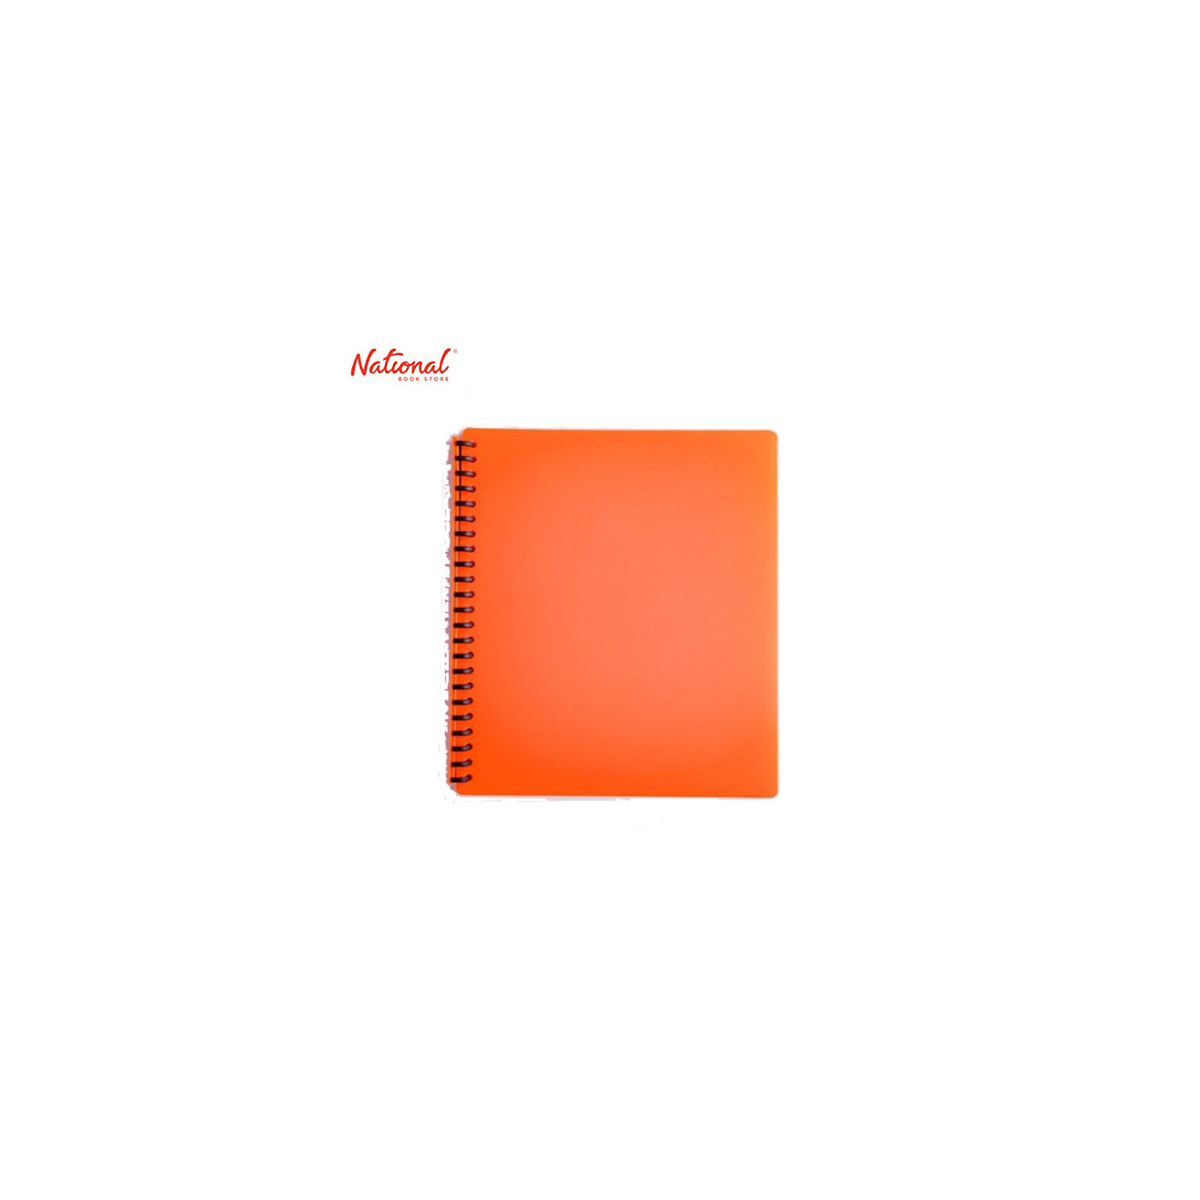 EVO Clearbook Refillable A4 20Sheets 23Holes Neon Orange